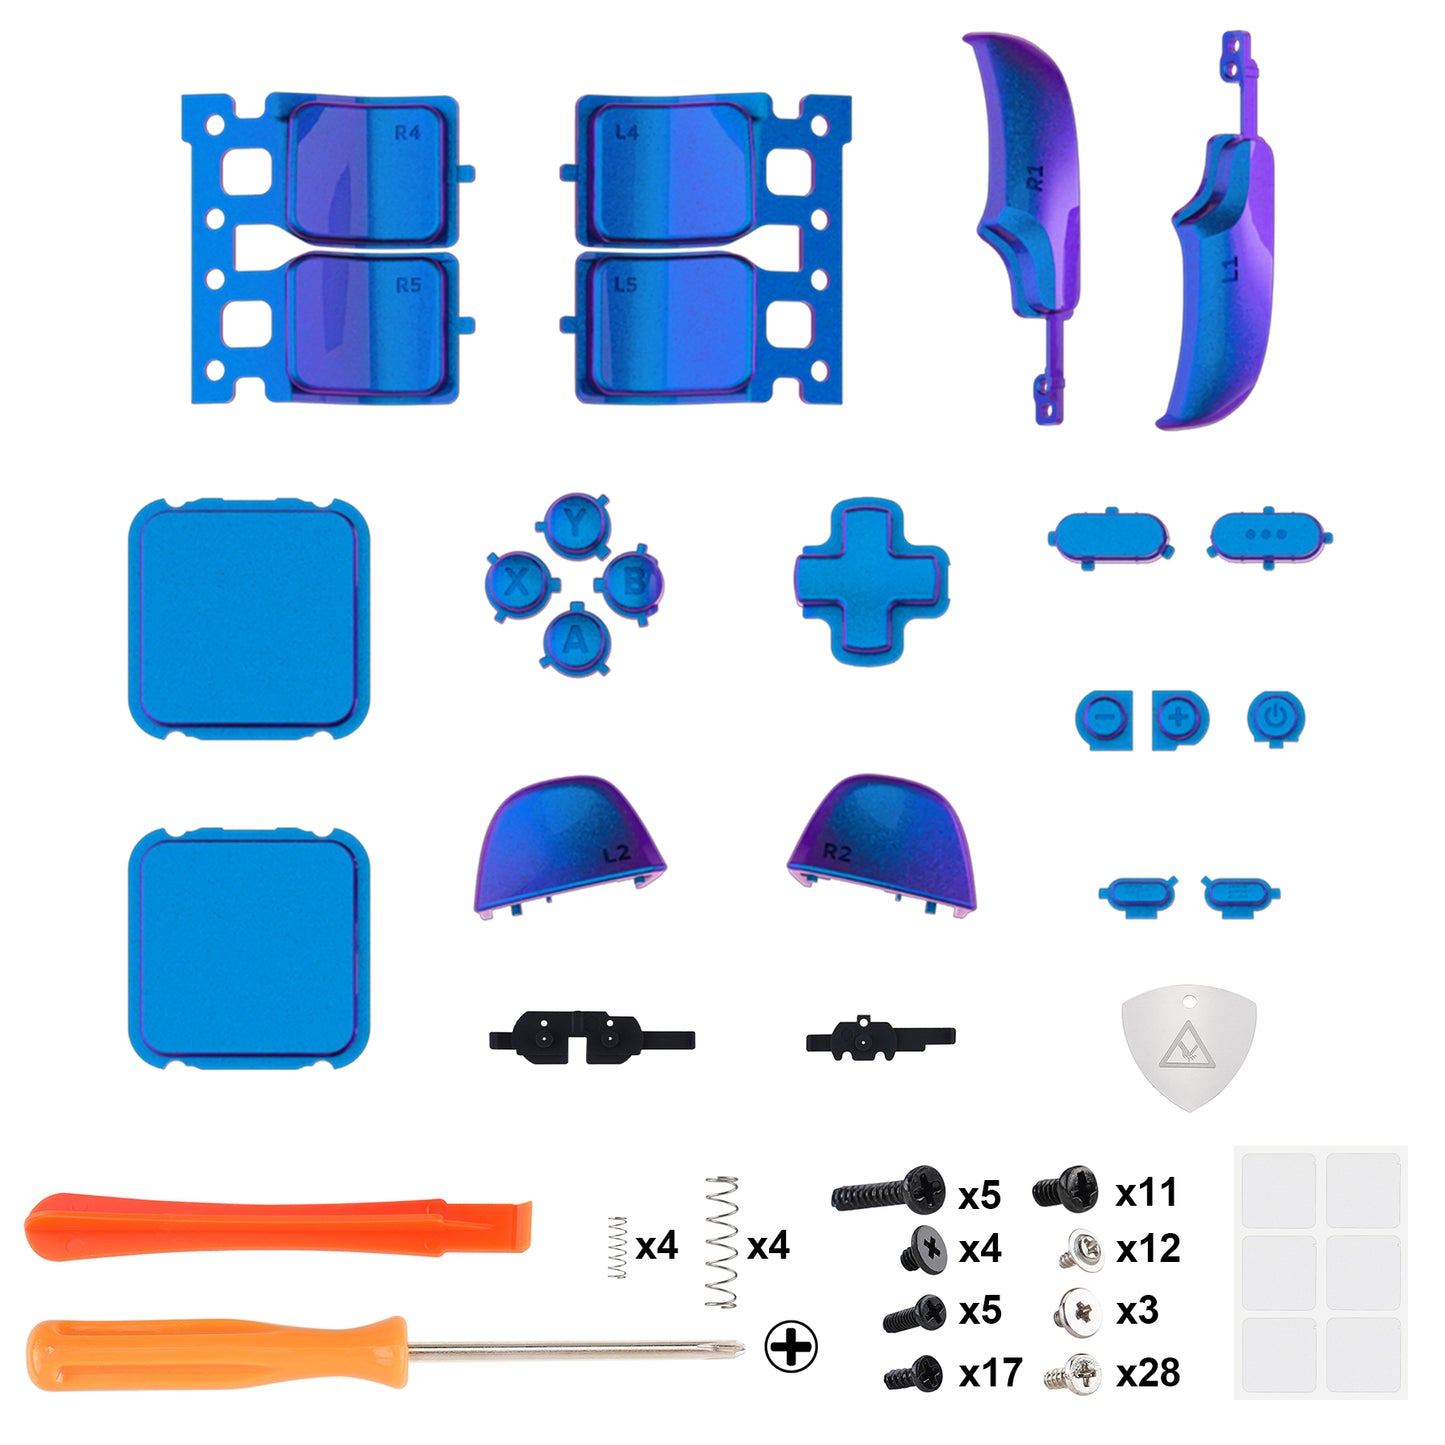 eXtremeRate Retail Chameleon Purple Blue Replacement Full Set Buttons for Steam Deck Console - JESDP004